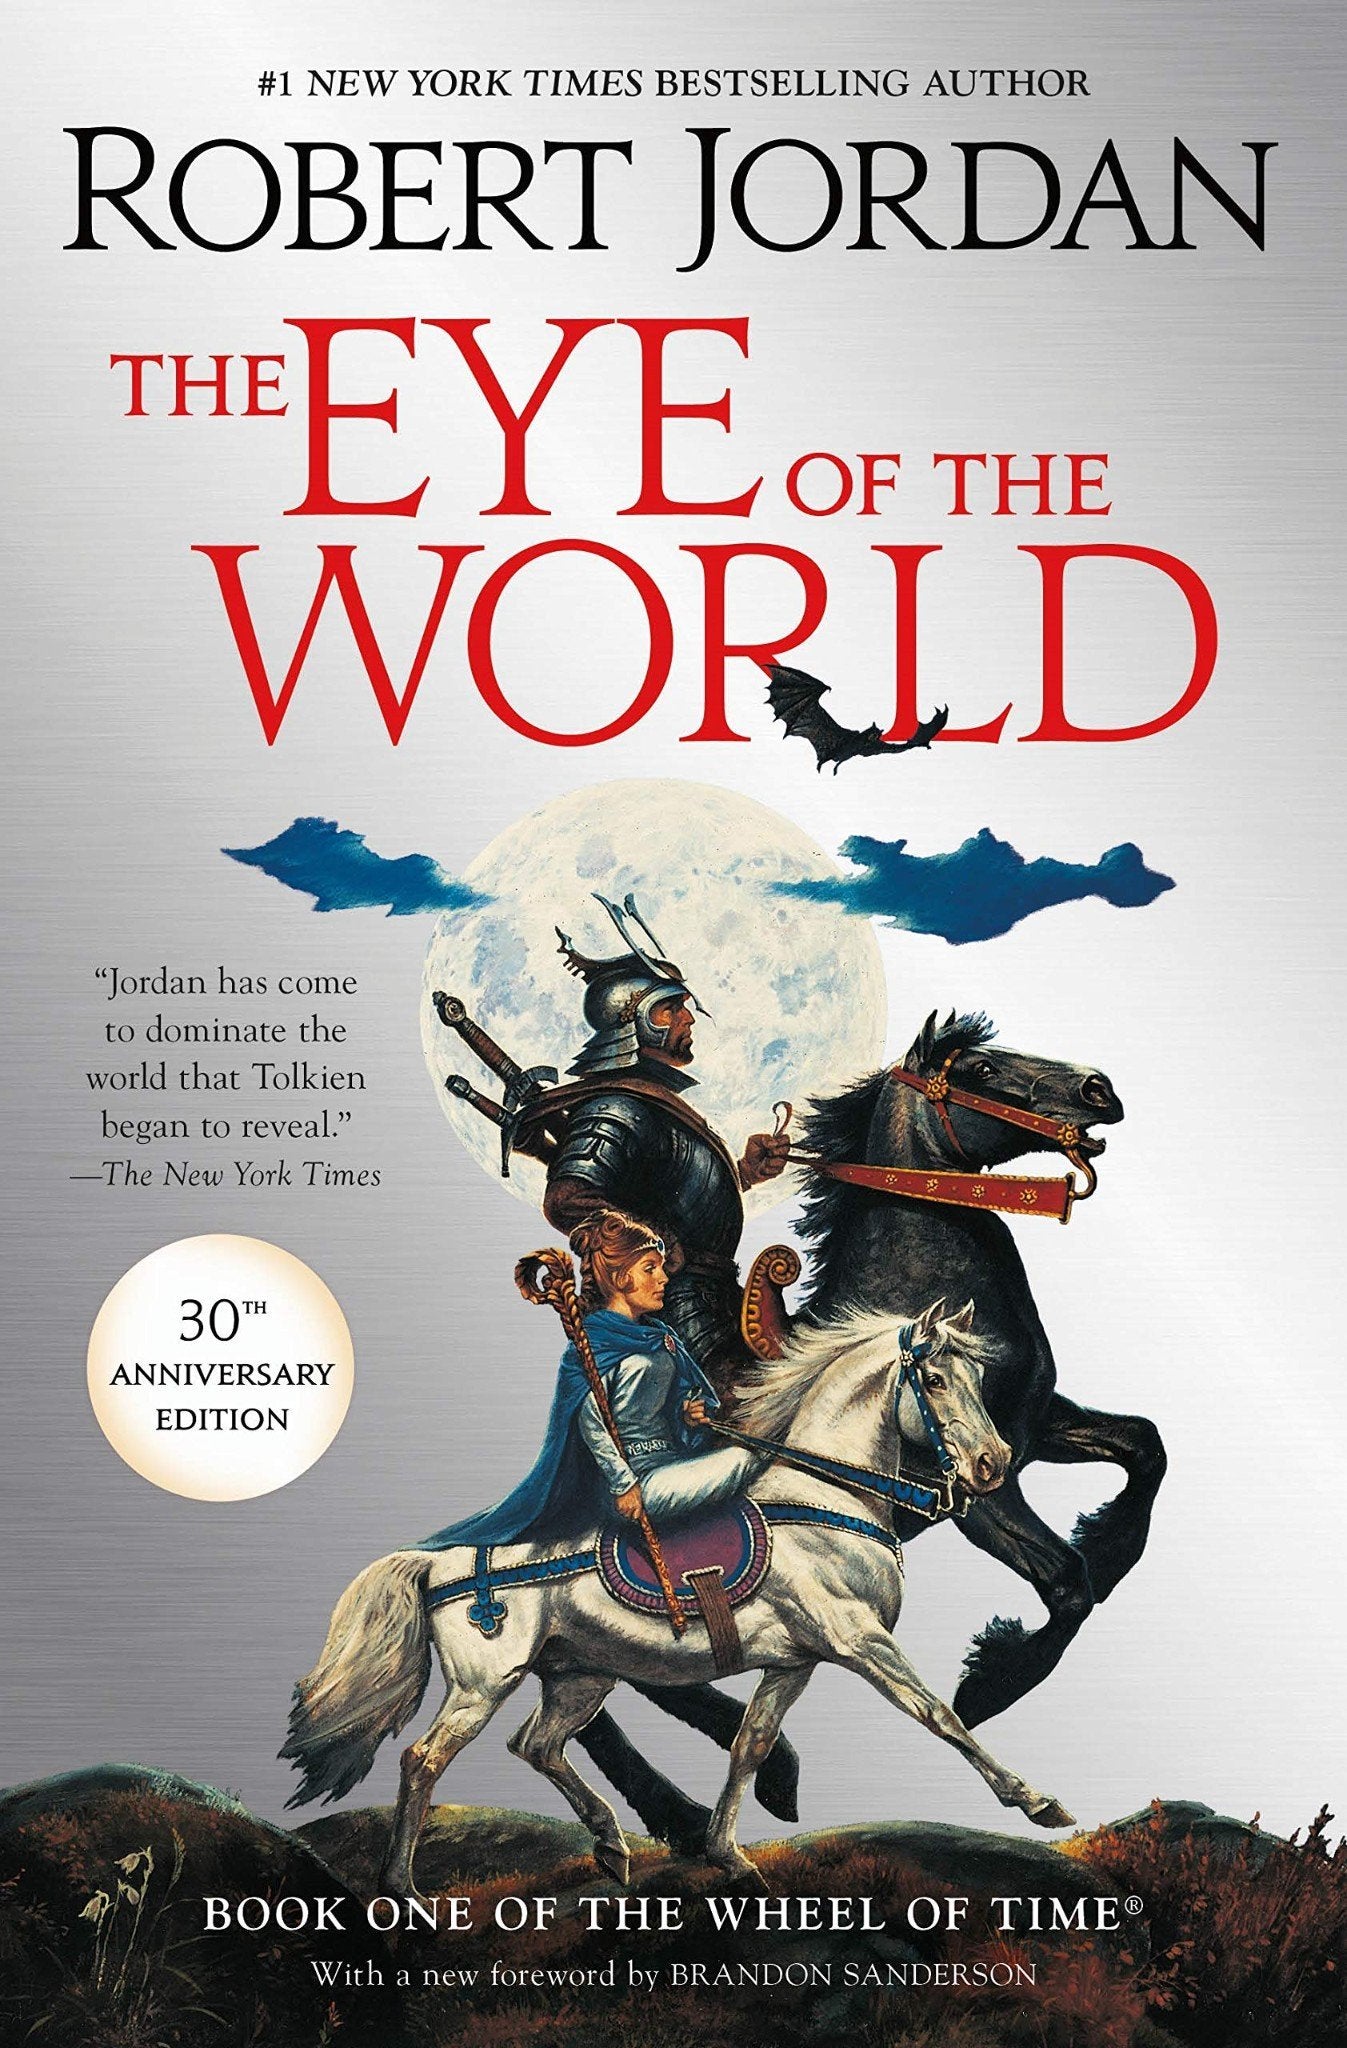 The Eye of the World - Book 1 Wheel of Time by Robert Jordan (Hardcover) 30th Anniversary Edition - LV'S Global Media